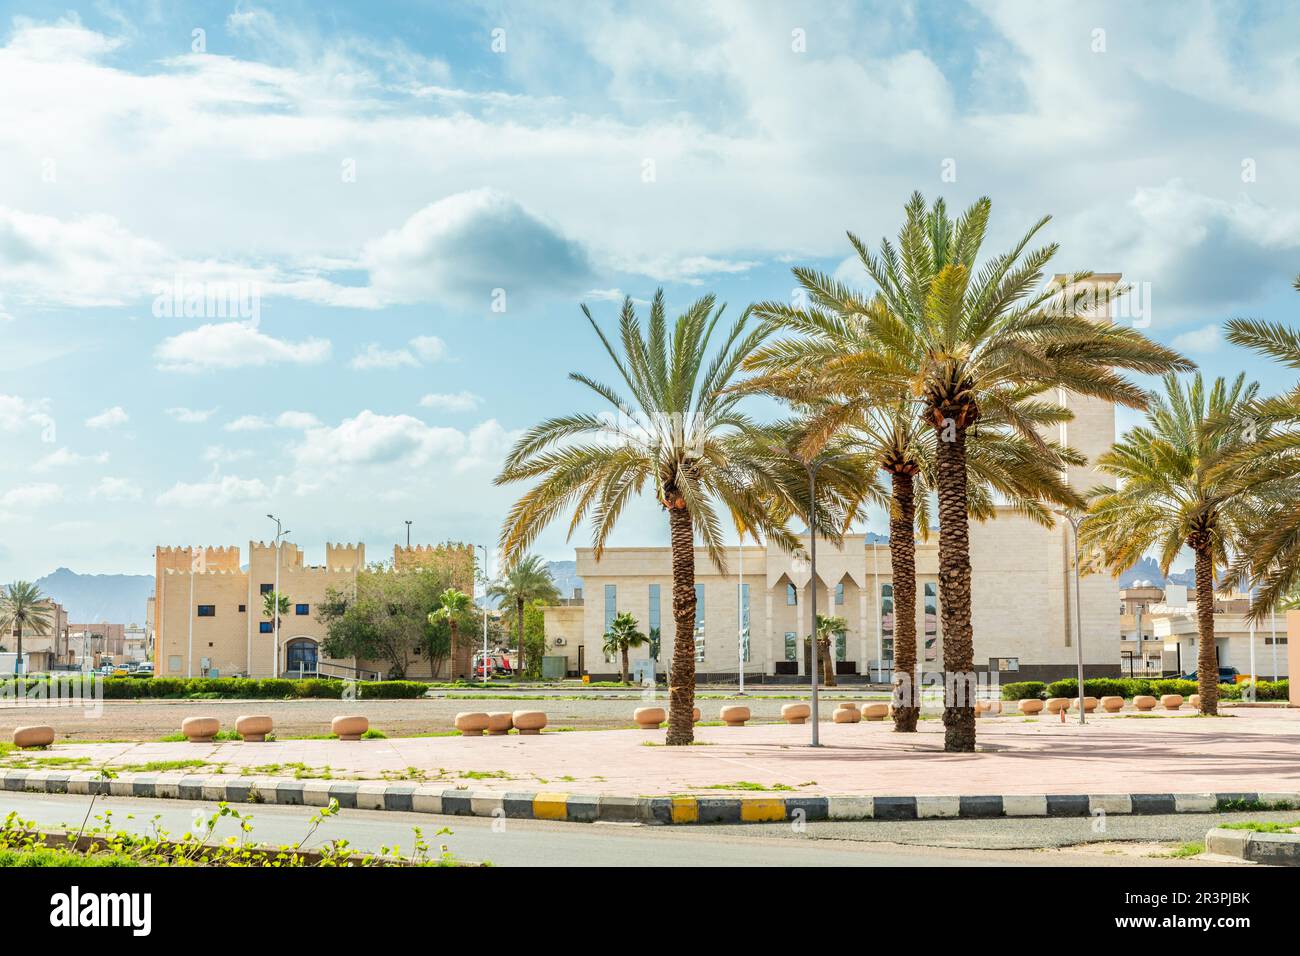 Hail city central square with palms in the front, Hail, Saudi Arabia Stock Photo